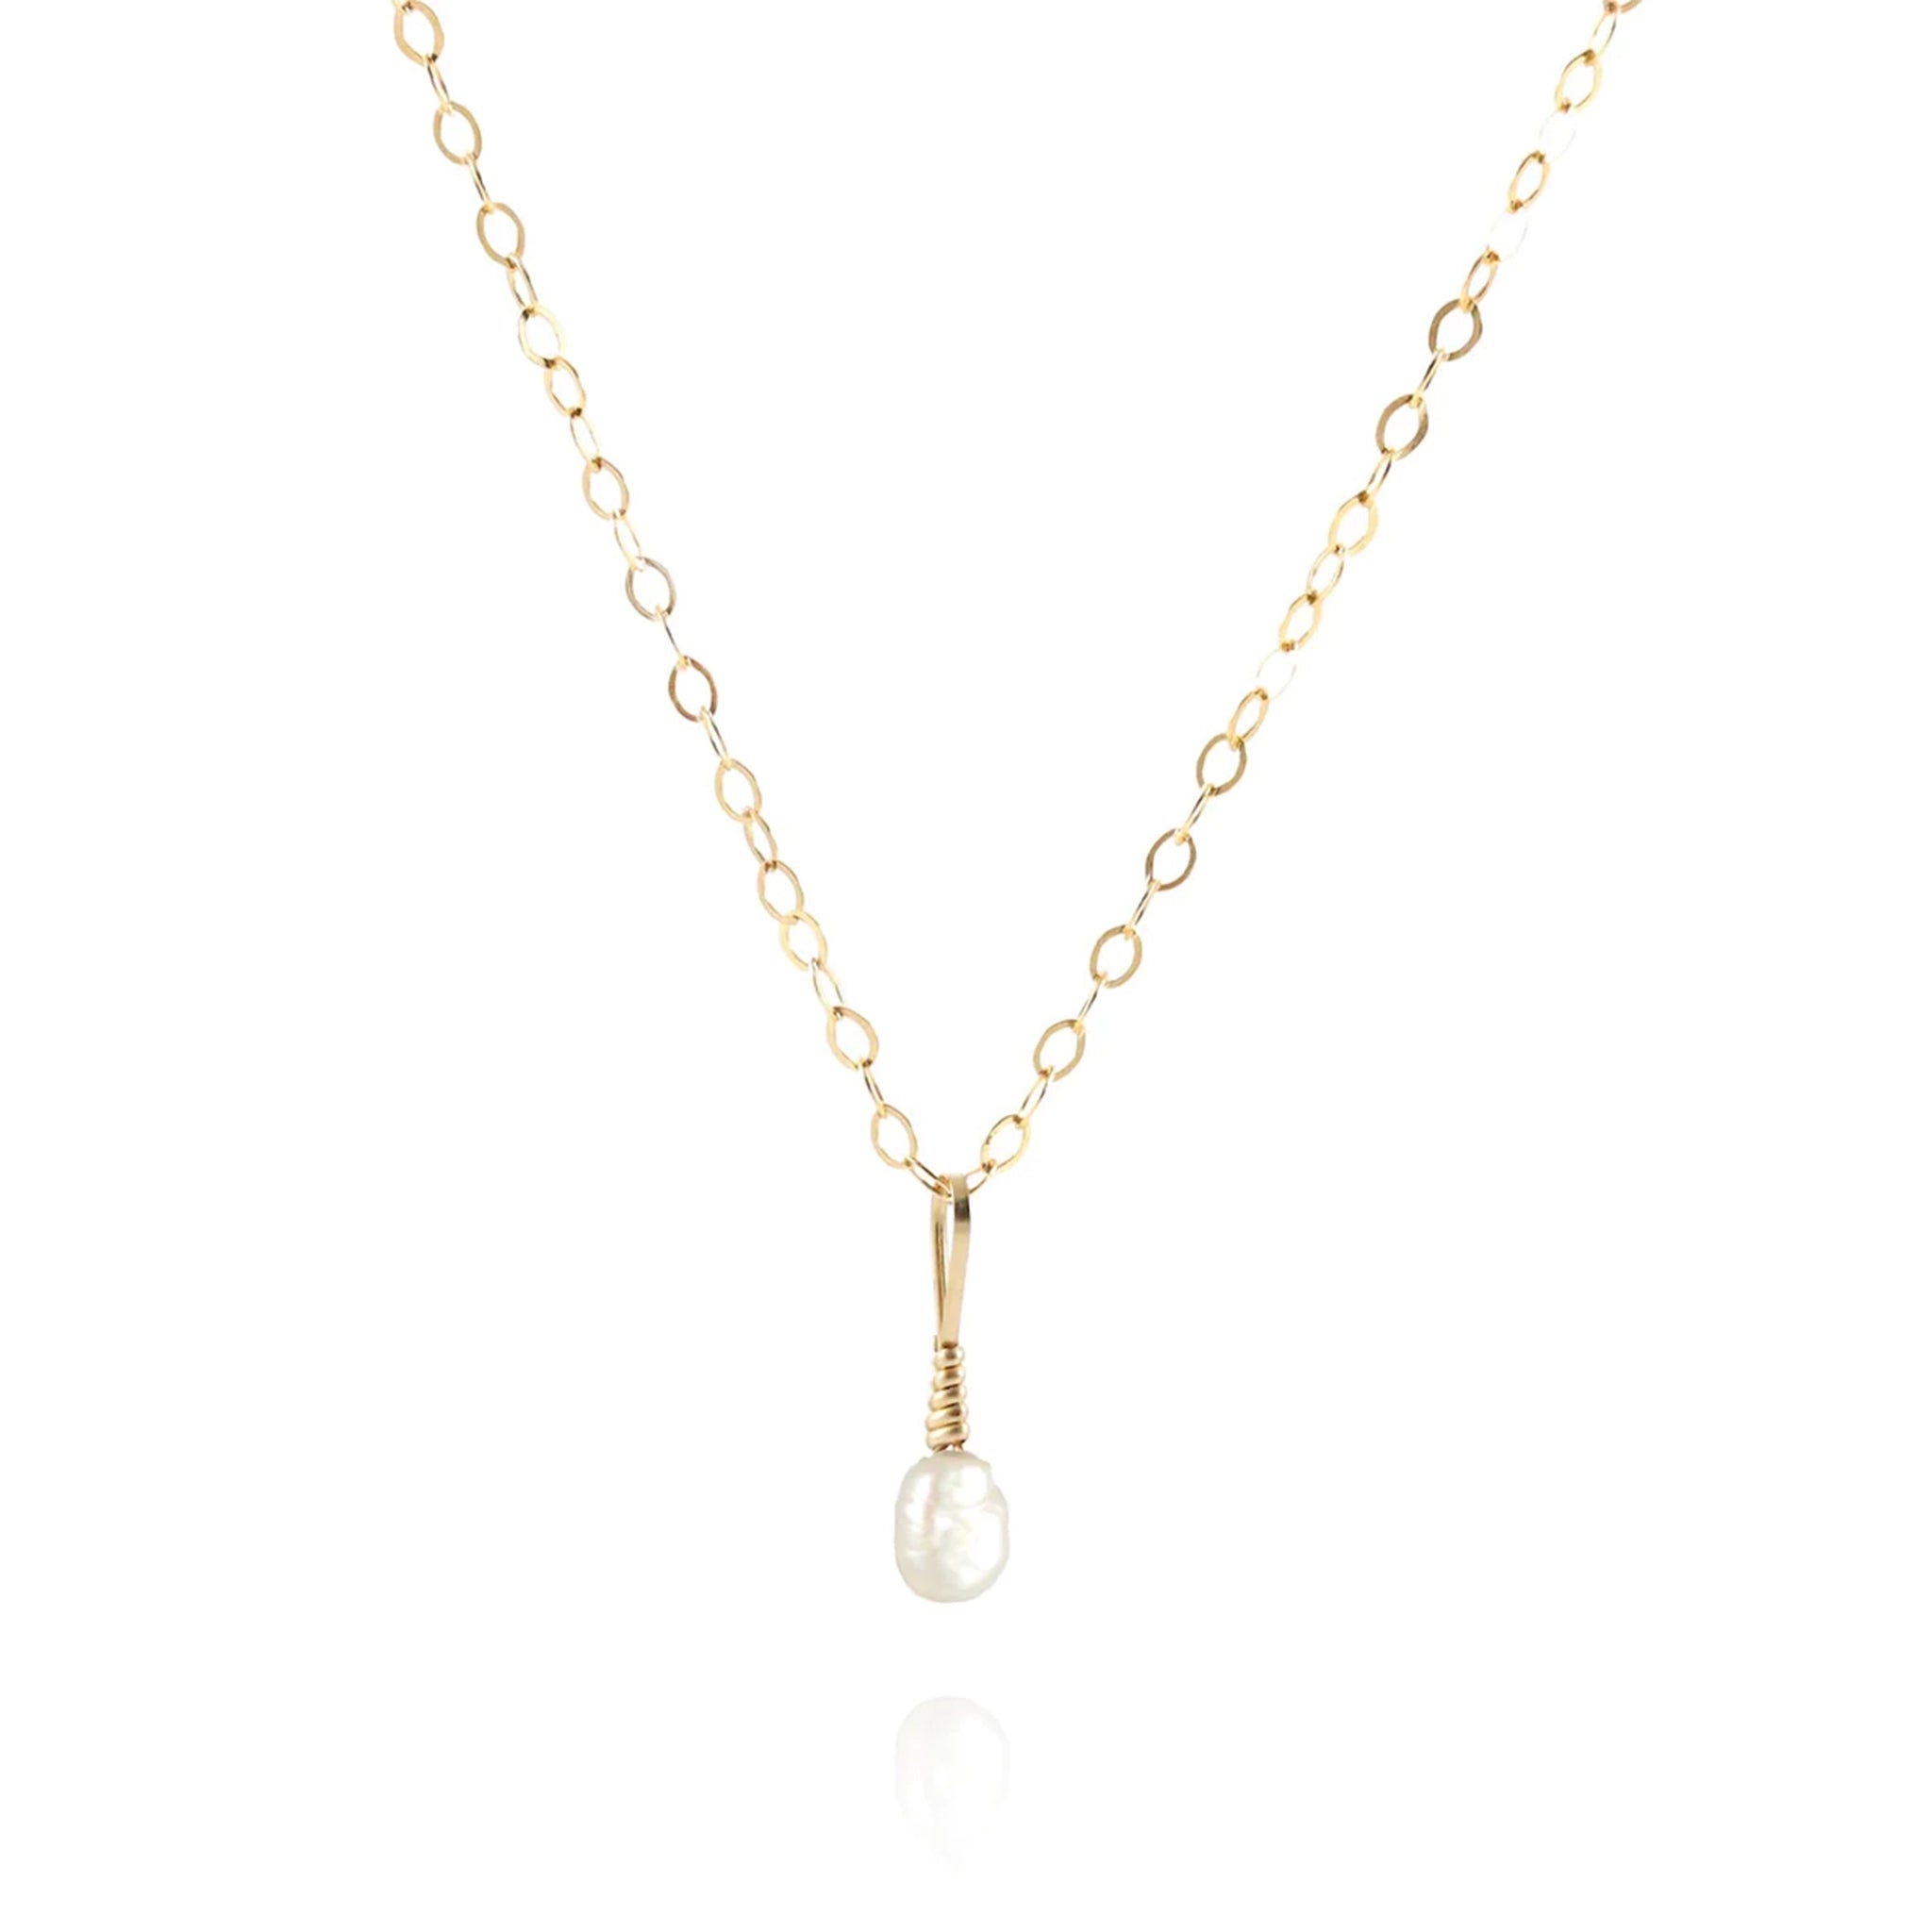 A gold filled necklace with a freshwater pearl pendant.